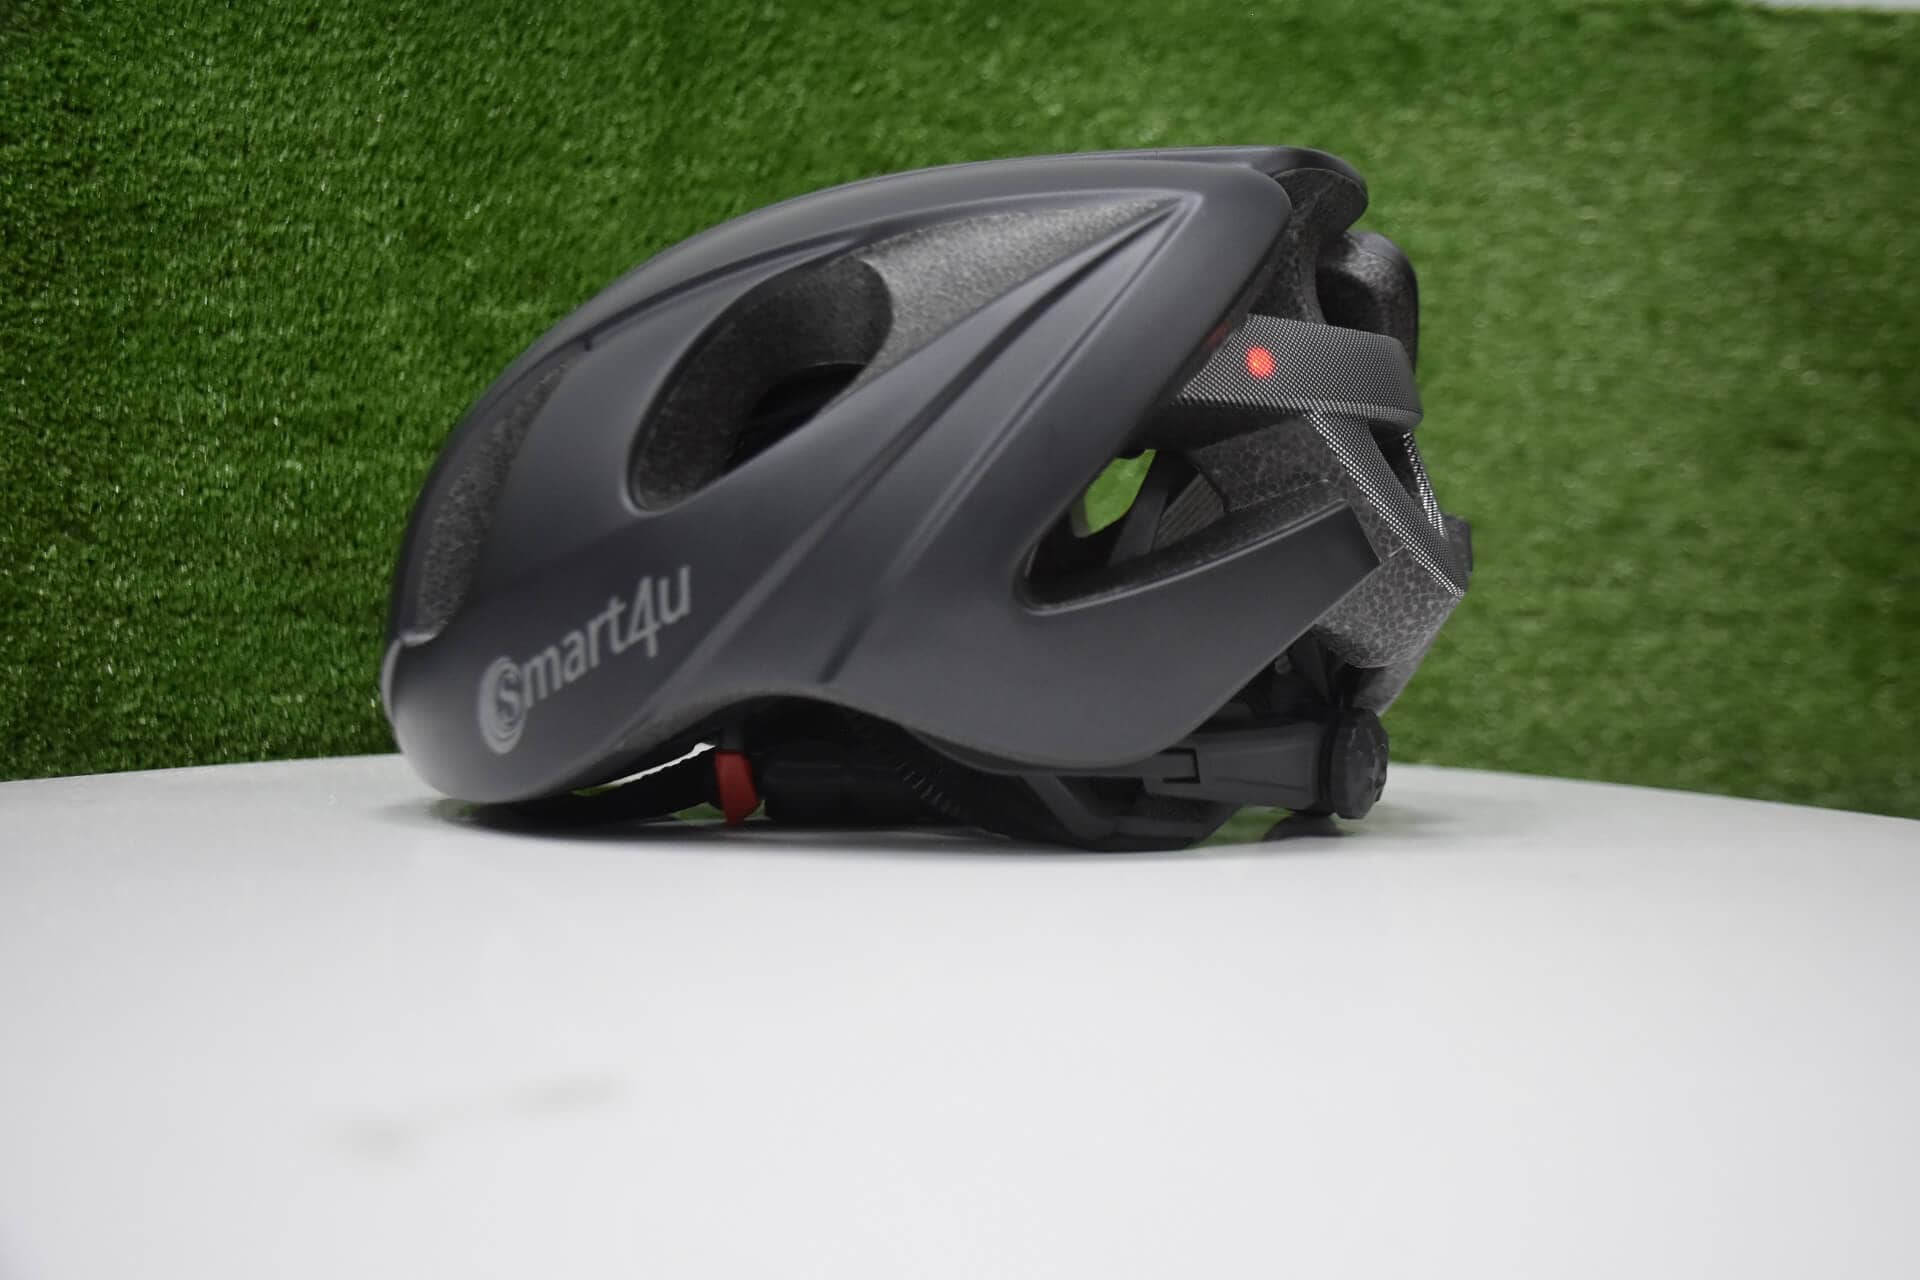 ebike accessories helmet SH55M smart helmet - Top 5 ebike accessories you must have before you hit the roads